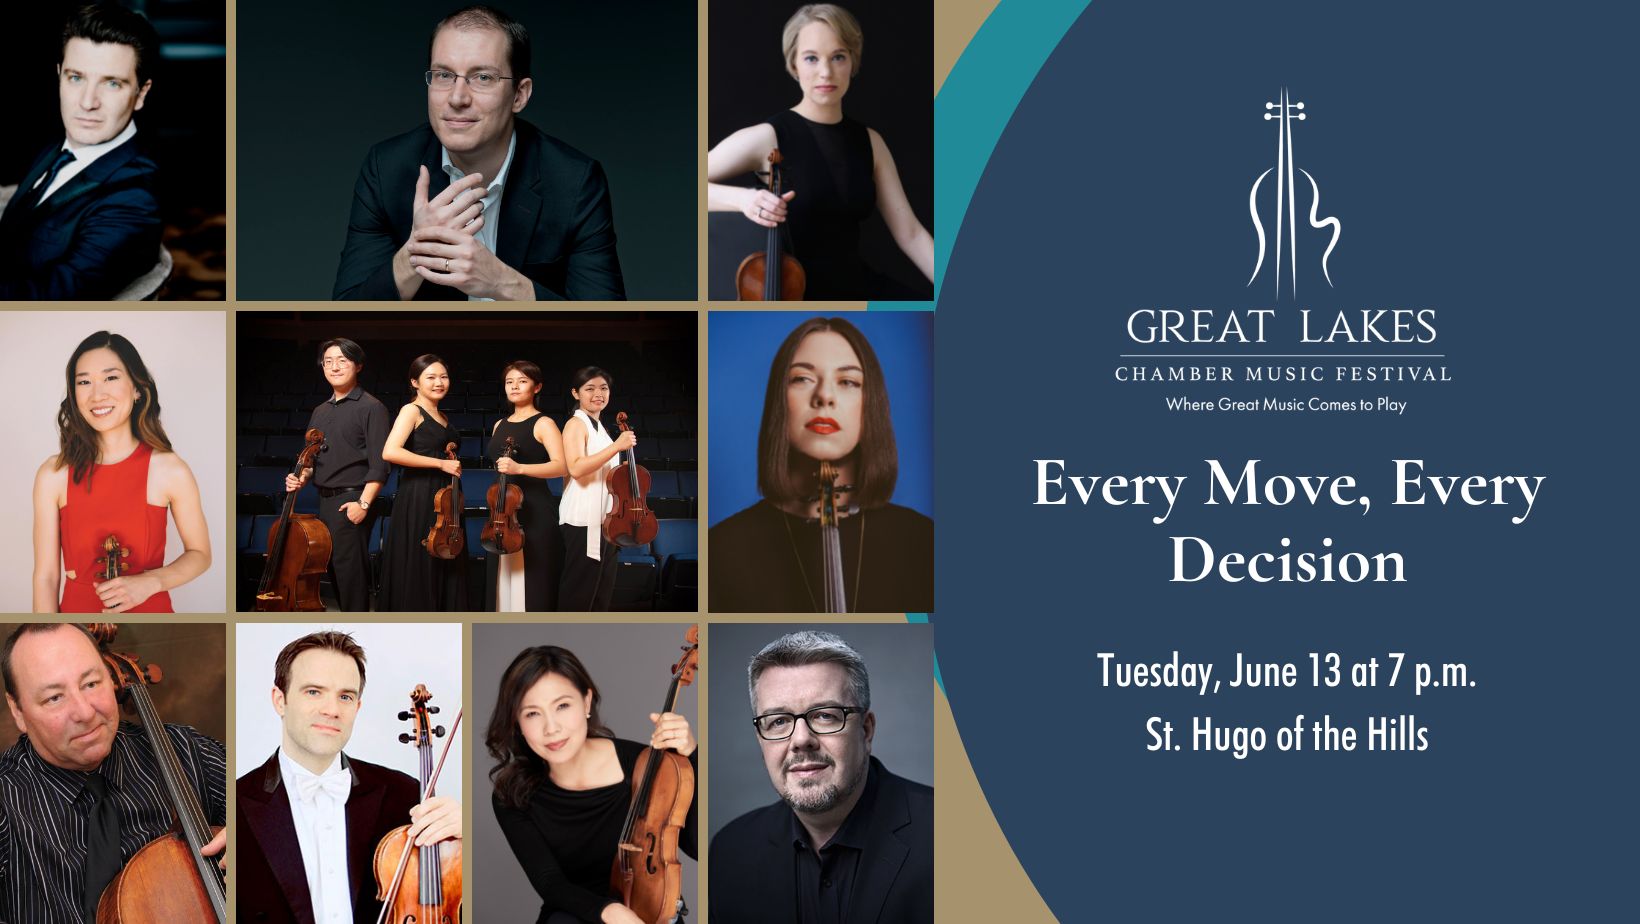 Every Move, Every Decision TUE JUNE 13 | 7 PM Alessio Bax, Gilles Vonsattel, Robyn Bollinger, Yvonne Lam, Tessa Lark, Hsin-Yun Huang, Eric Nowlin, Paul Watkins, Peter Wiley, Hesper Quartet